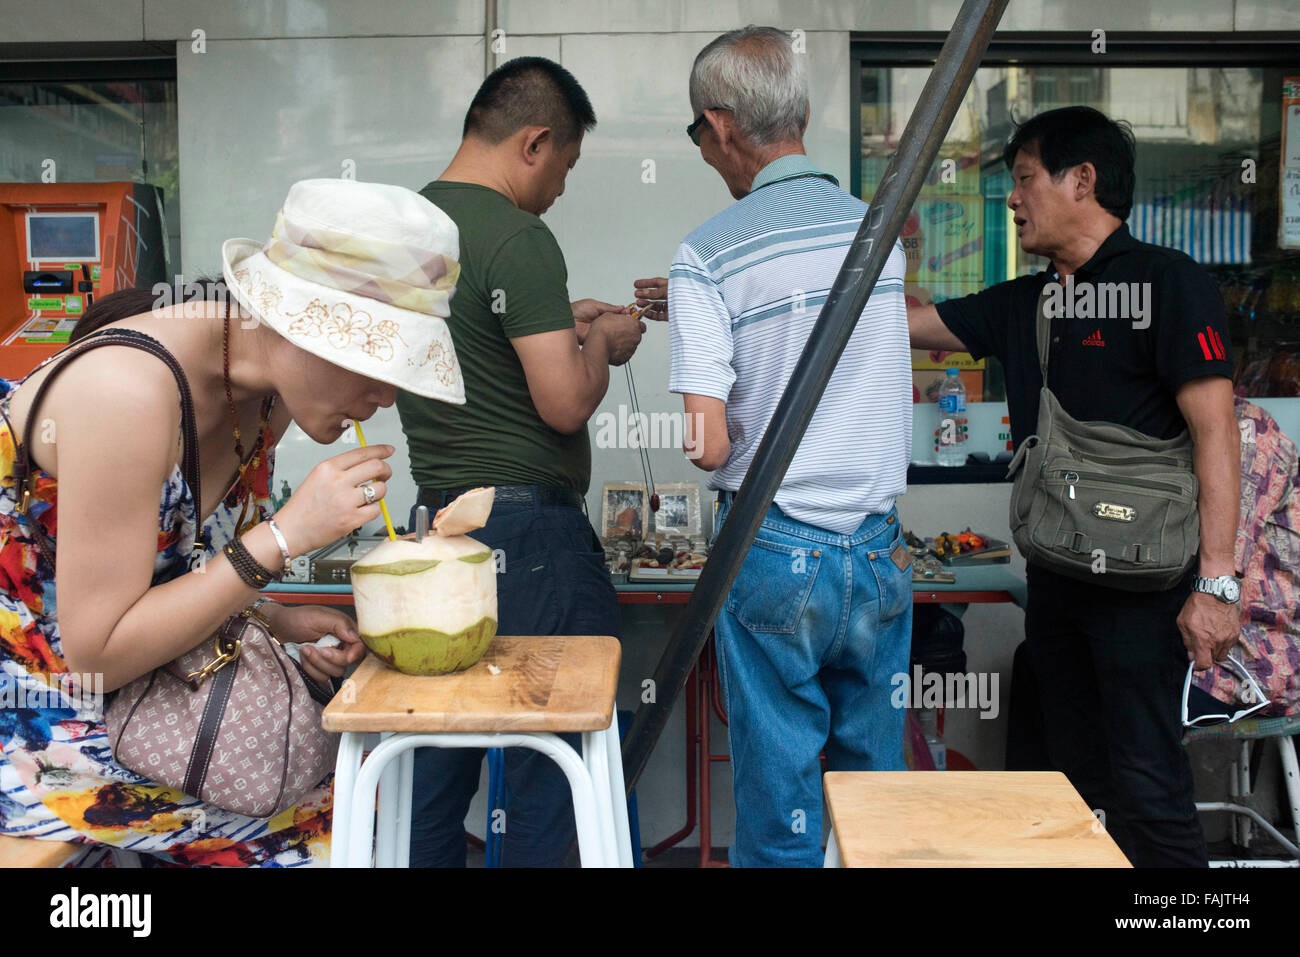 Woman drinking in a coconut in front of a Amulets stall in the street in Chinatown Bangkok, Thailand. Yaowarat, Bangkok’s Chinatown, is the World’s most renowned street food destination and the local favorite dining district. Stock Photo